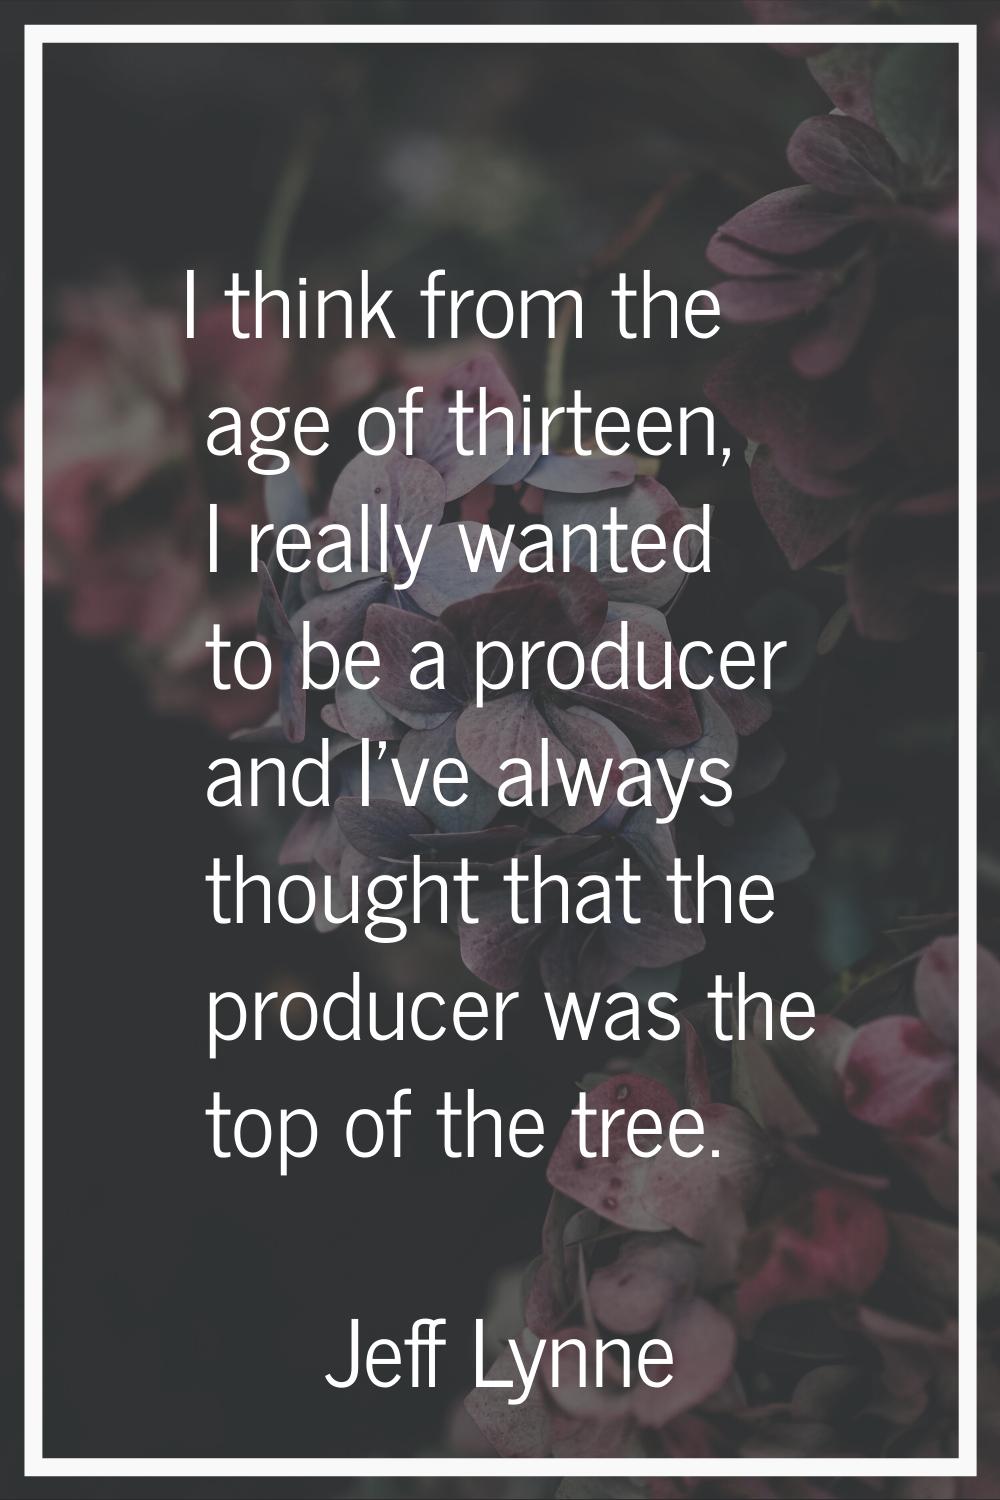 I think from the age of thirteen, I really wanted to be a producer and I've always thought that the